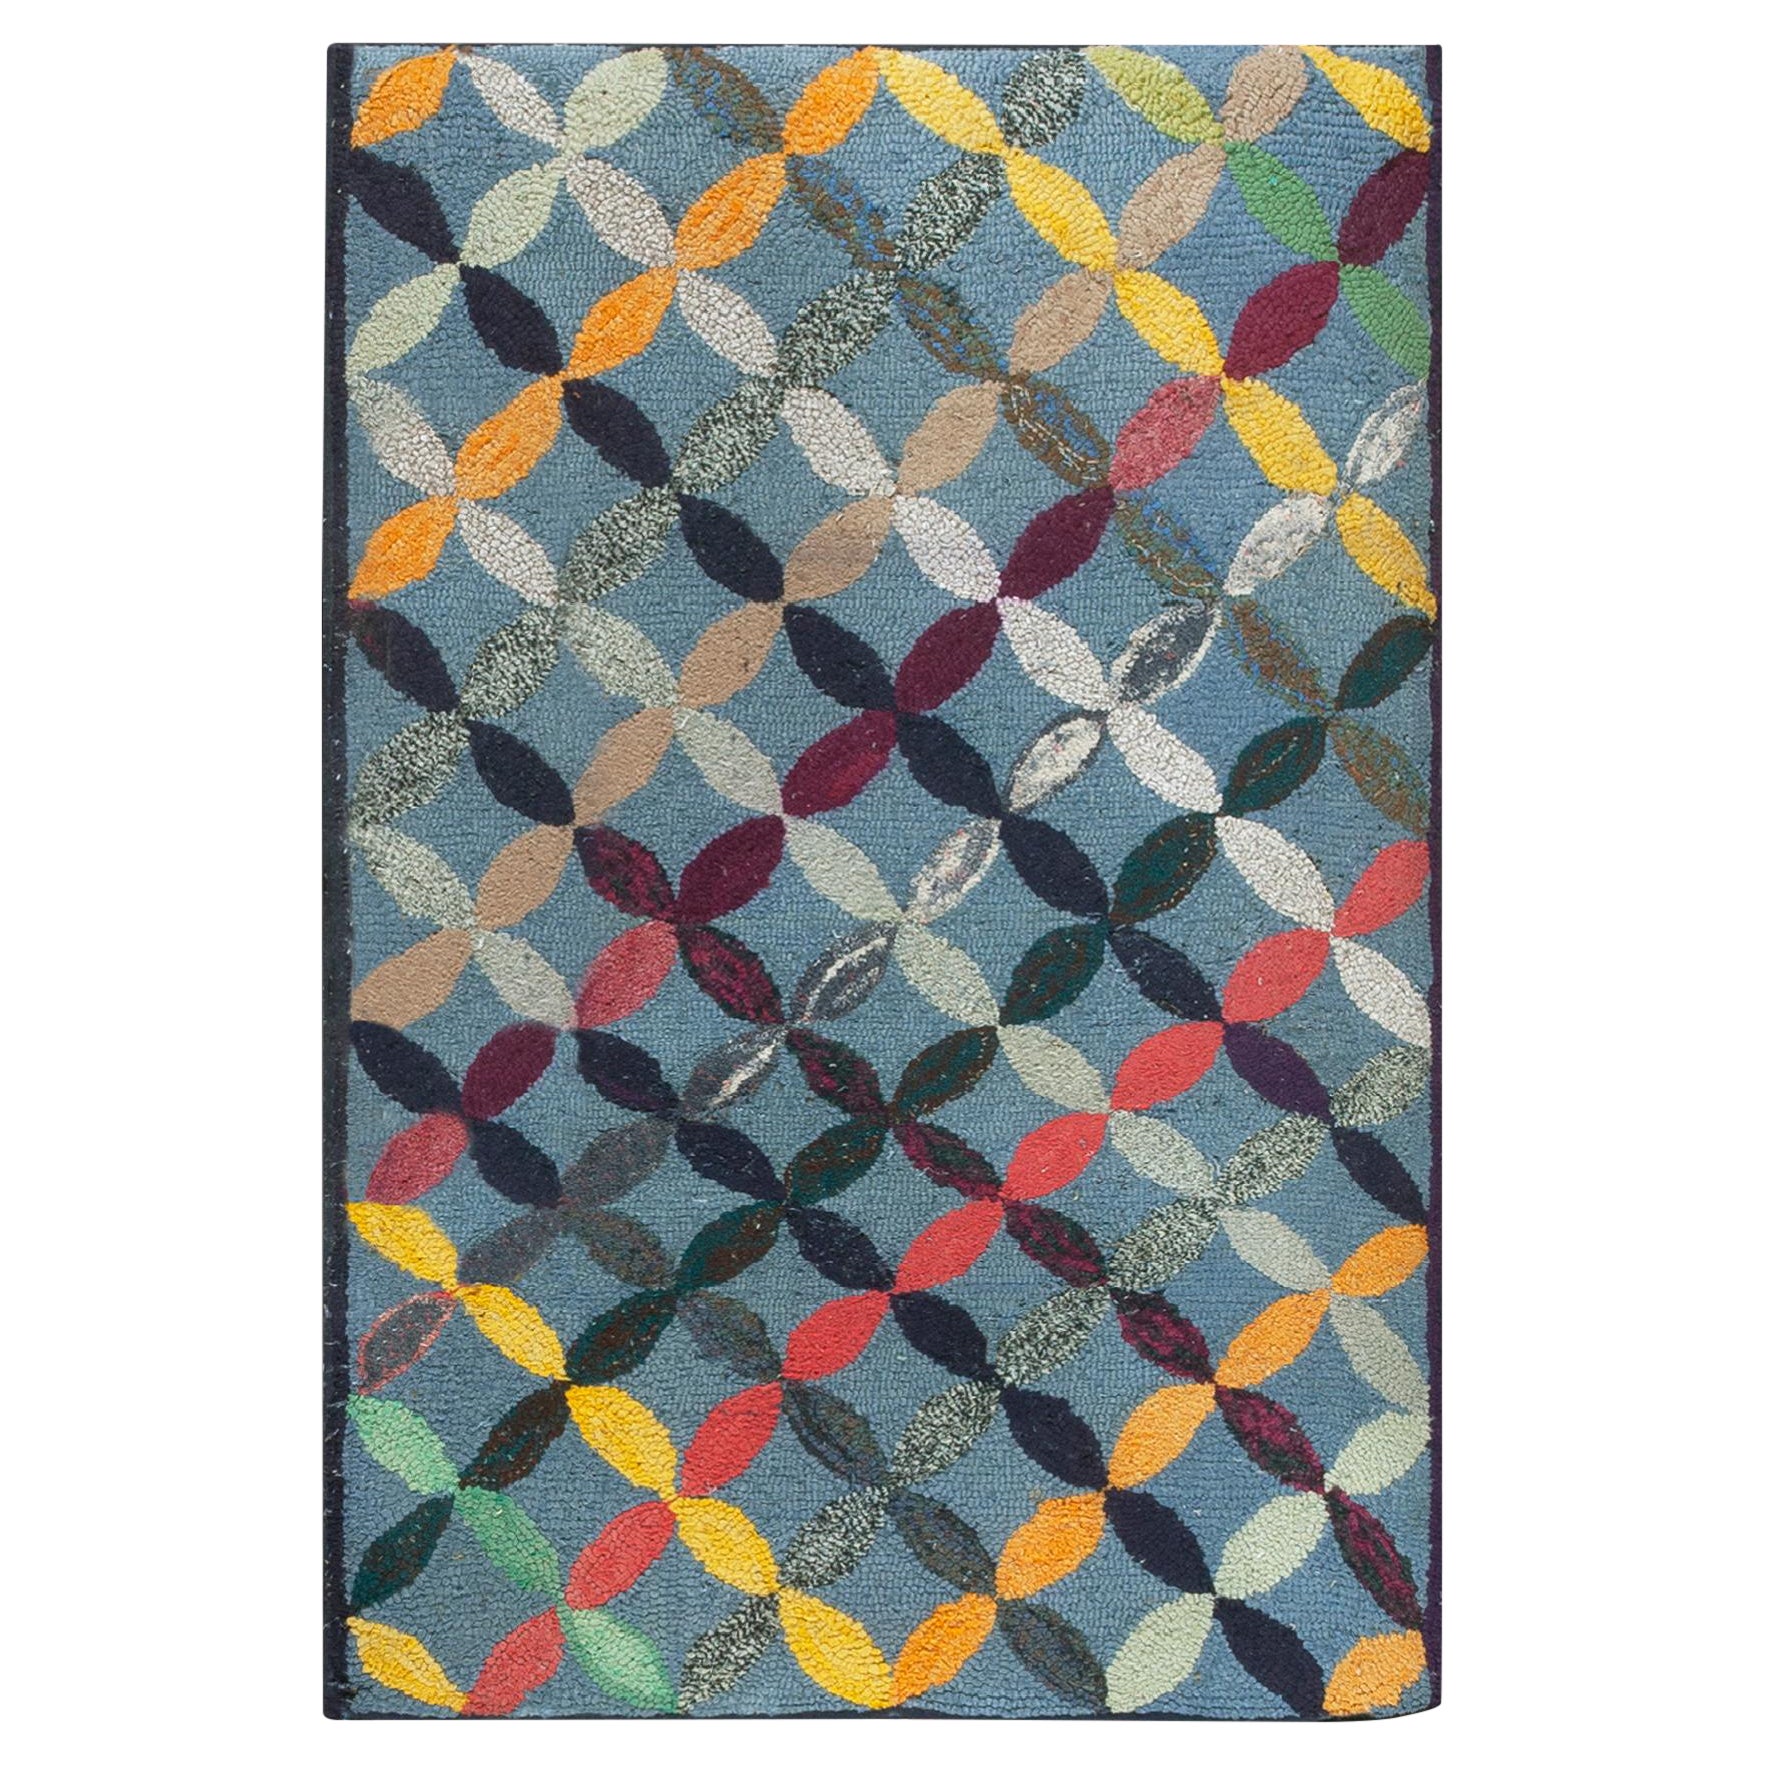 1930s American Hooked Rug ( 2' 4'' x 3' 7'' - 72 x 110 cm ) For Sale